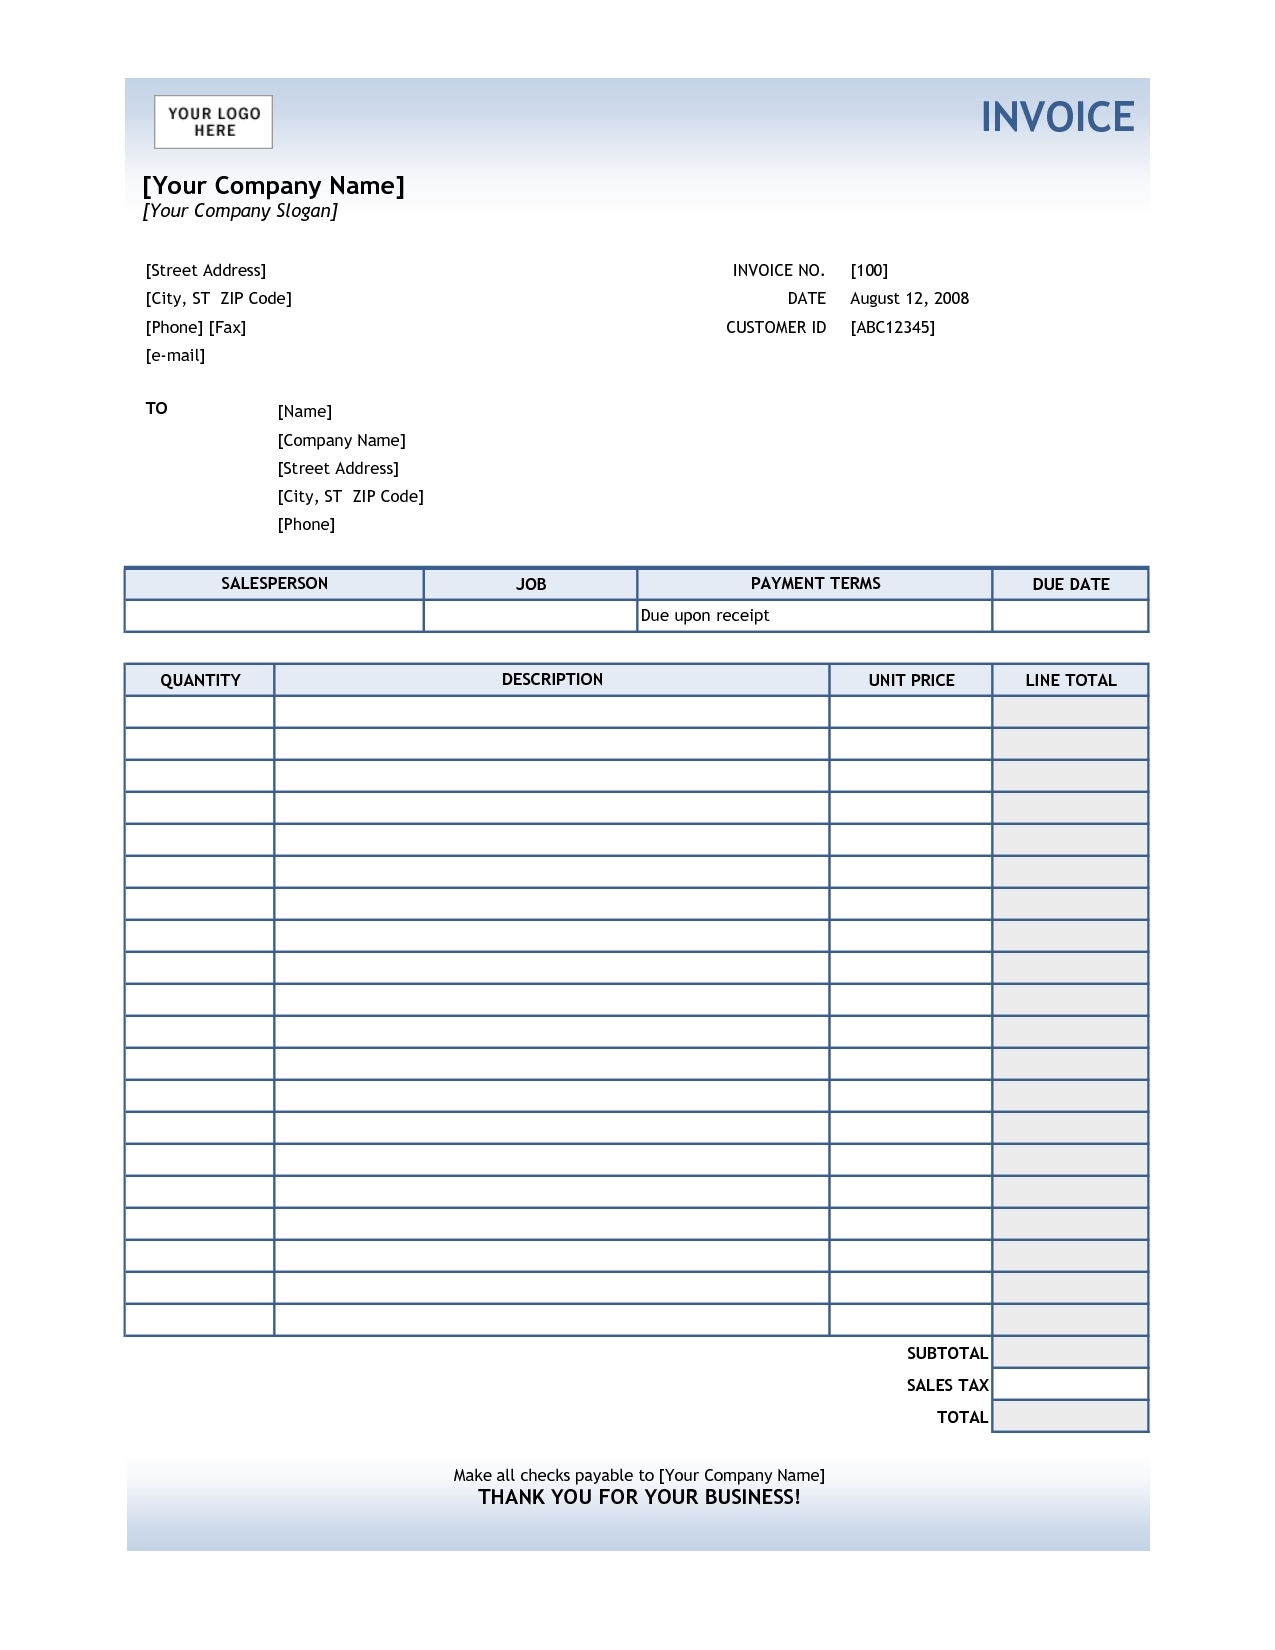 invoice format excel invoice template free 2016 excel service invoice template